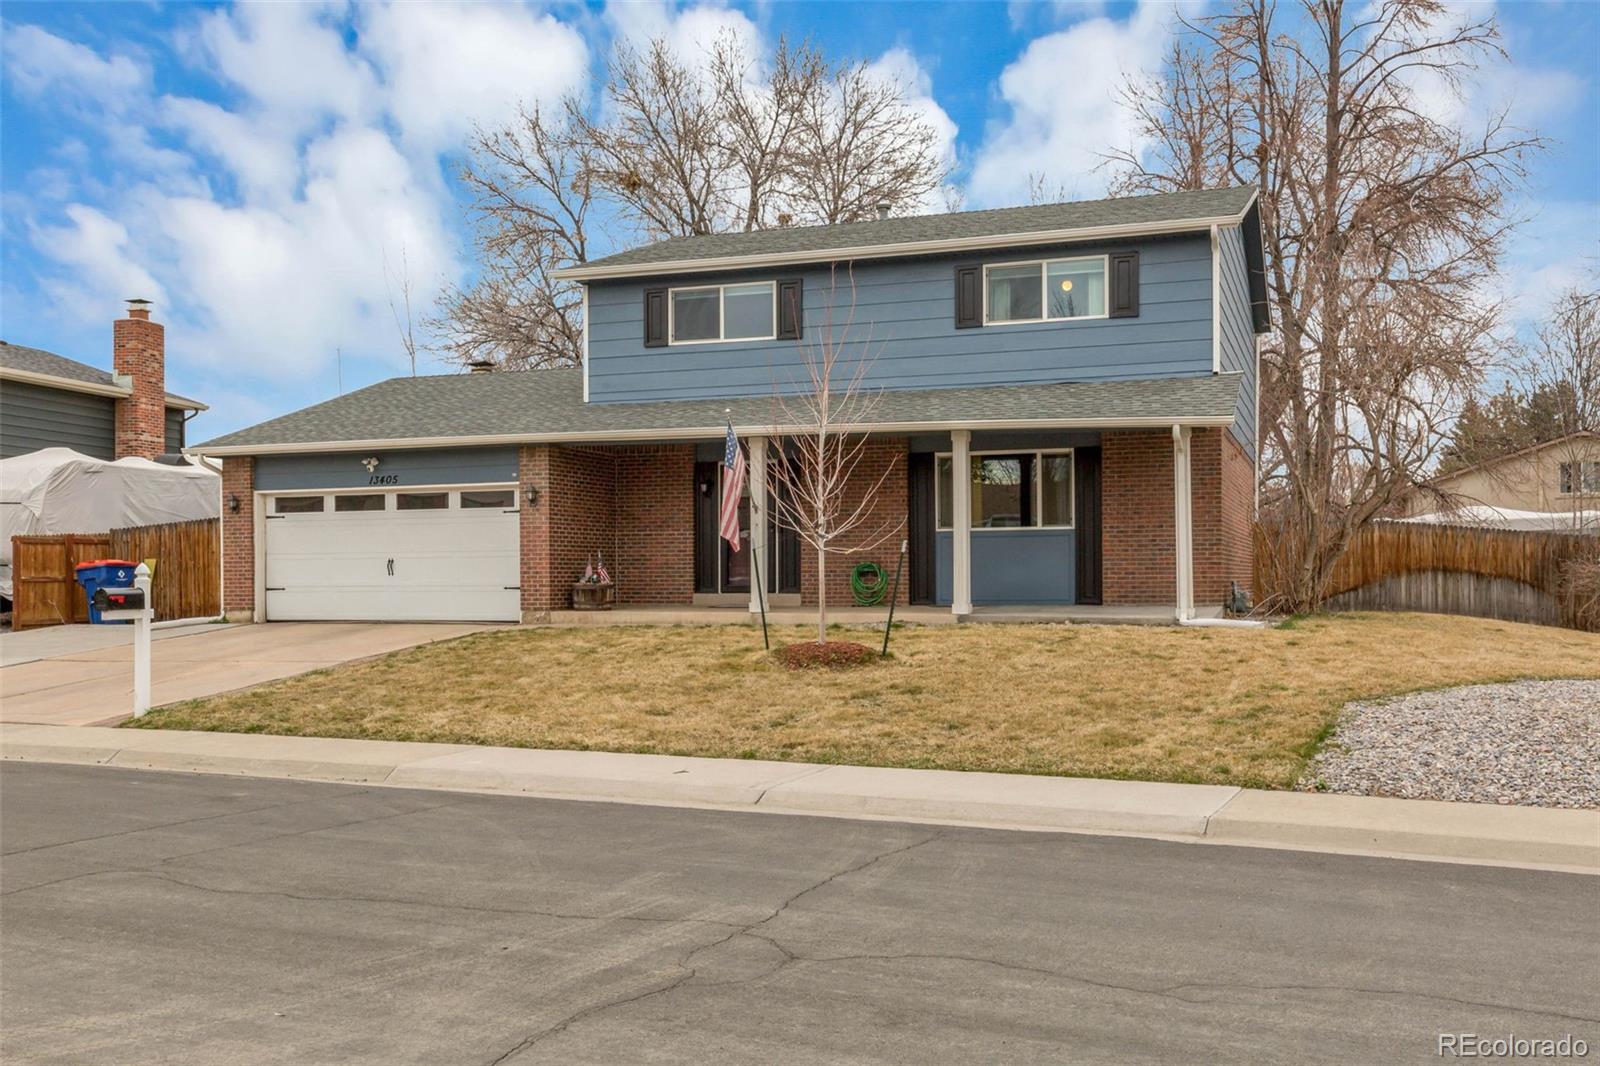 13405 W 72nd Place, arvada MLS: 3793459 Beds: 4 Baths: 4 Price: $660,000